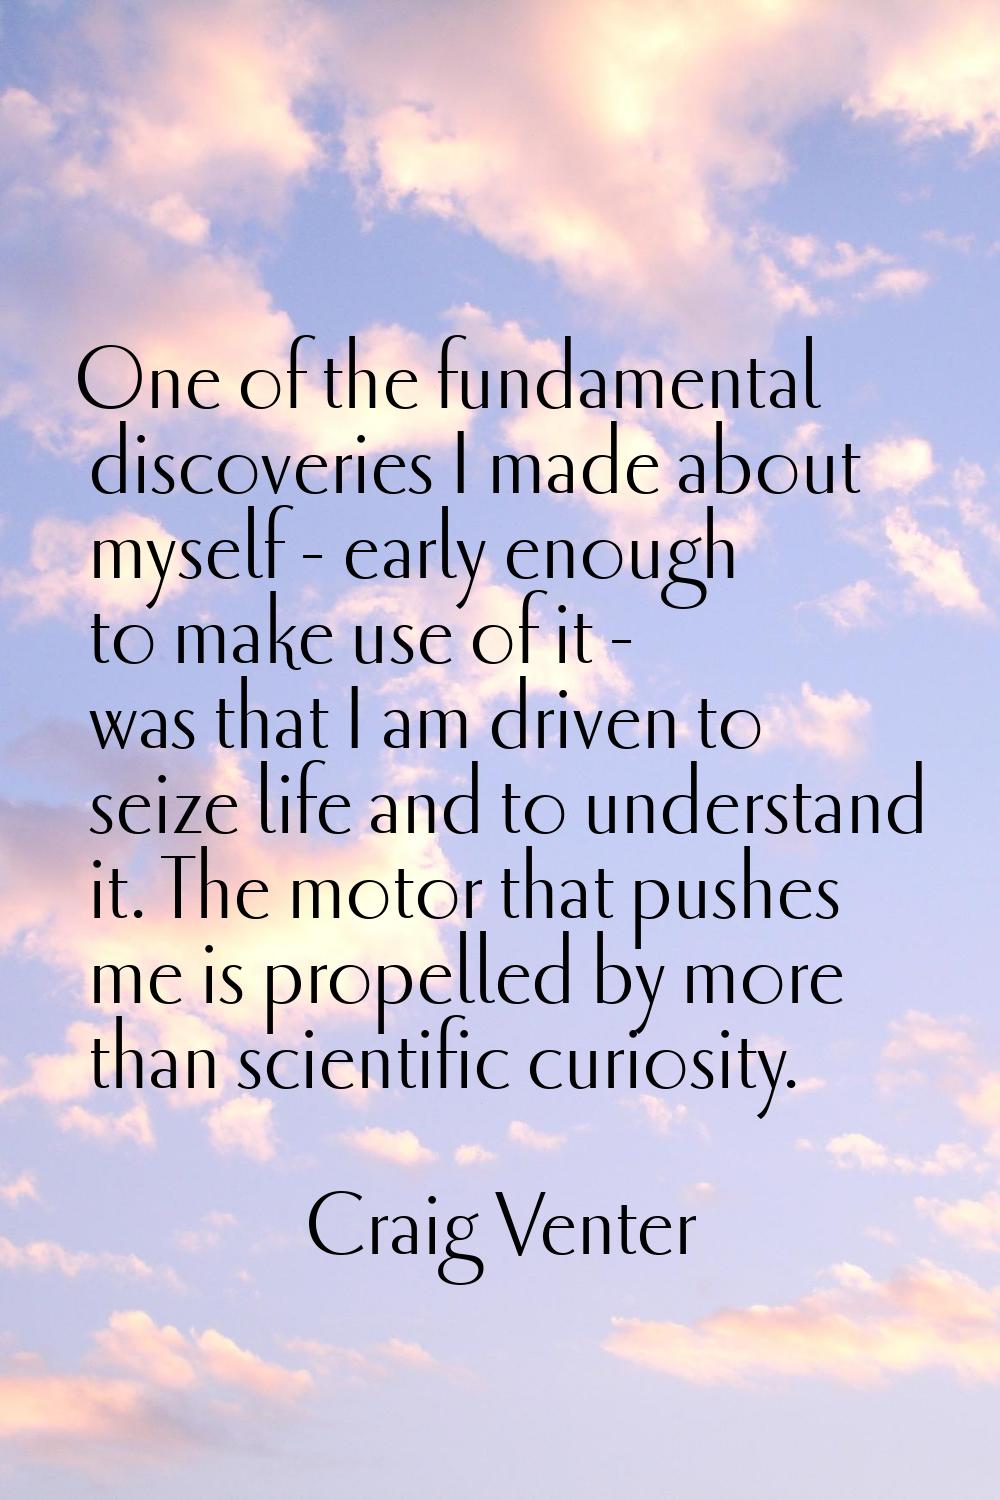 One of the fundamental discoveries I made about myself - early enough to make use of it - was that 